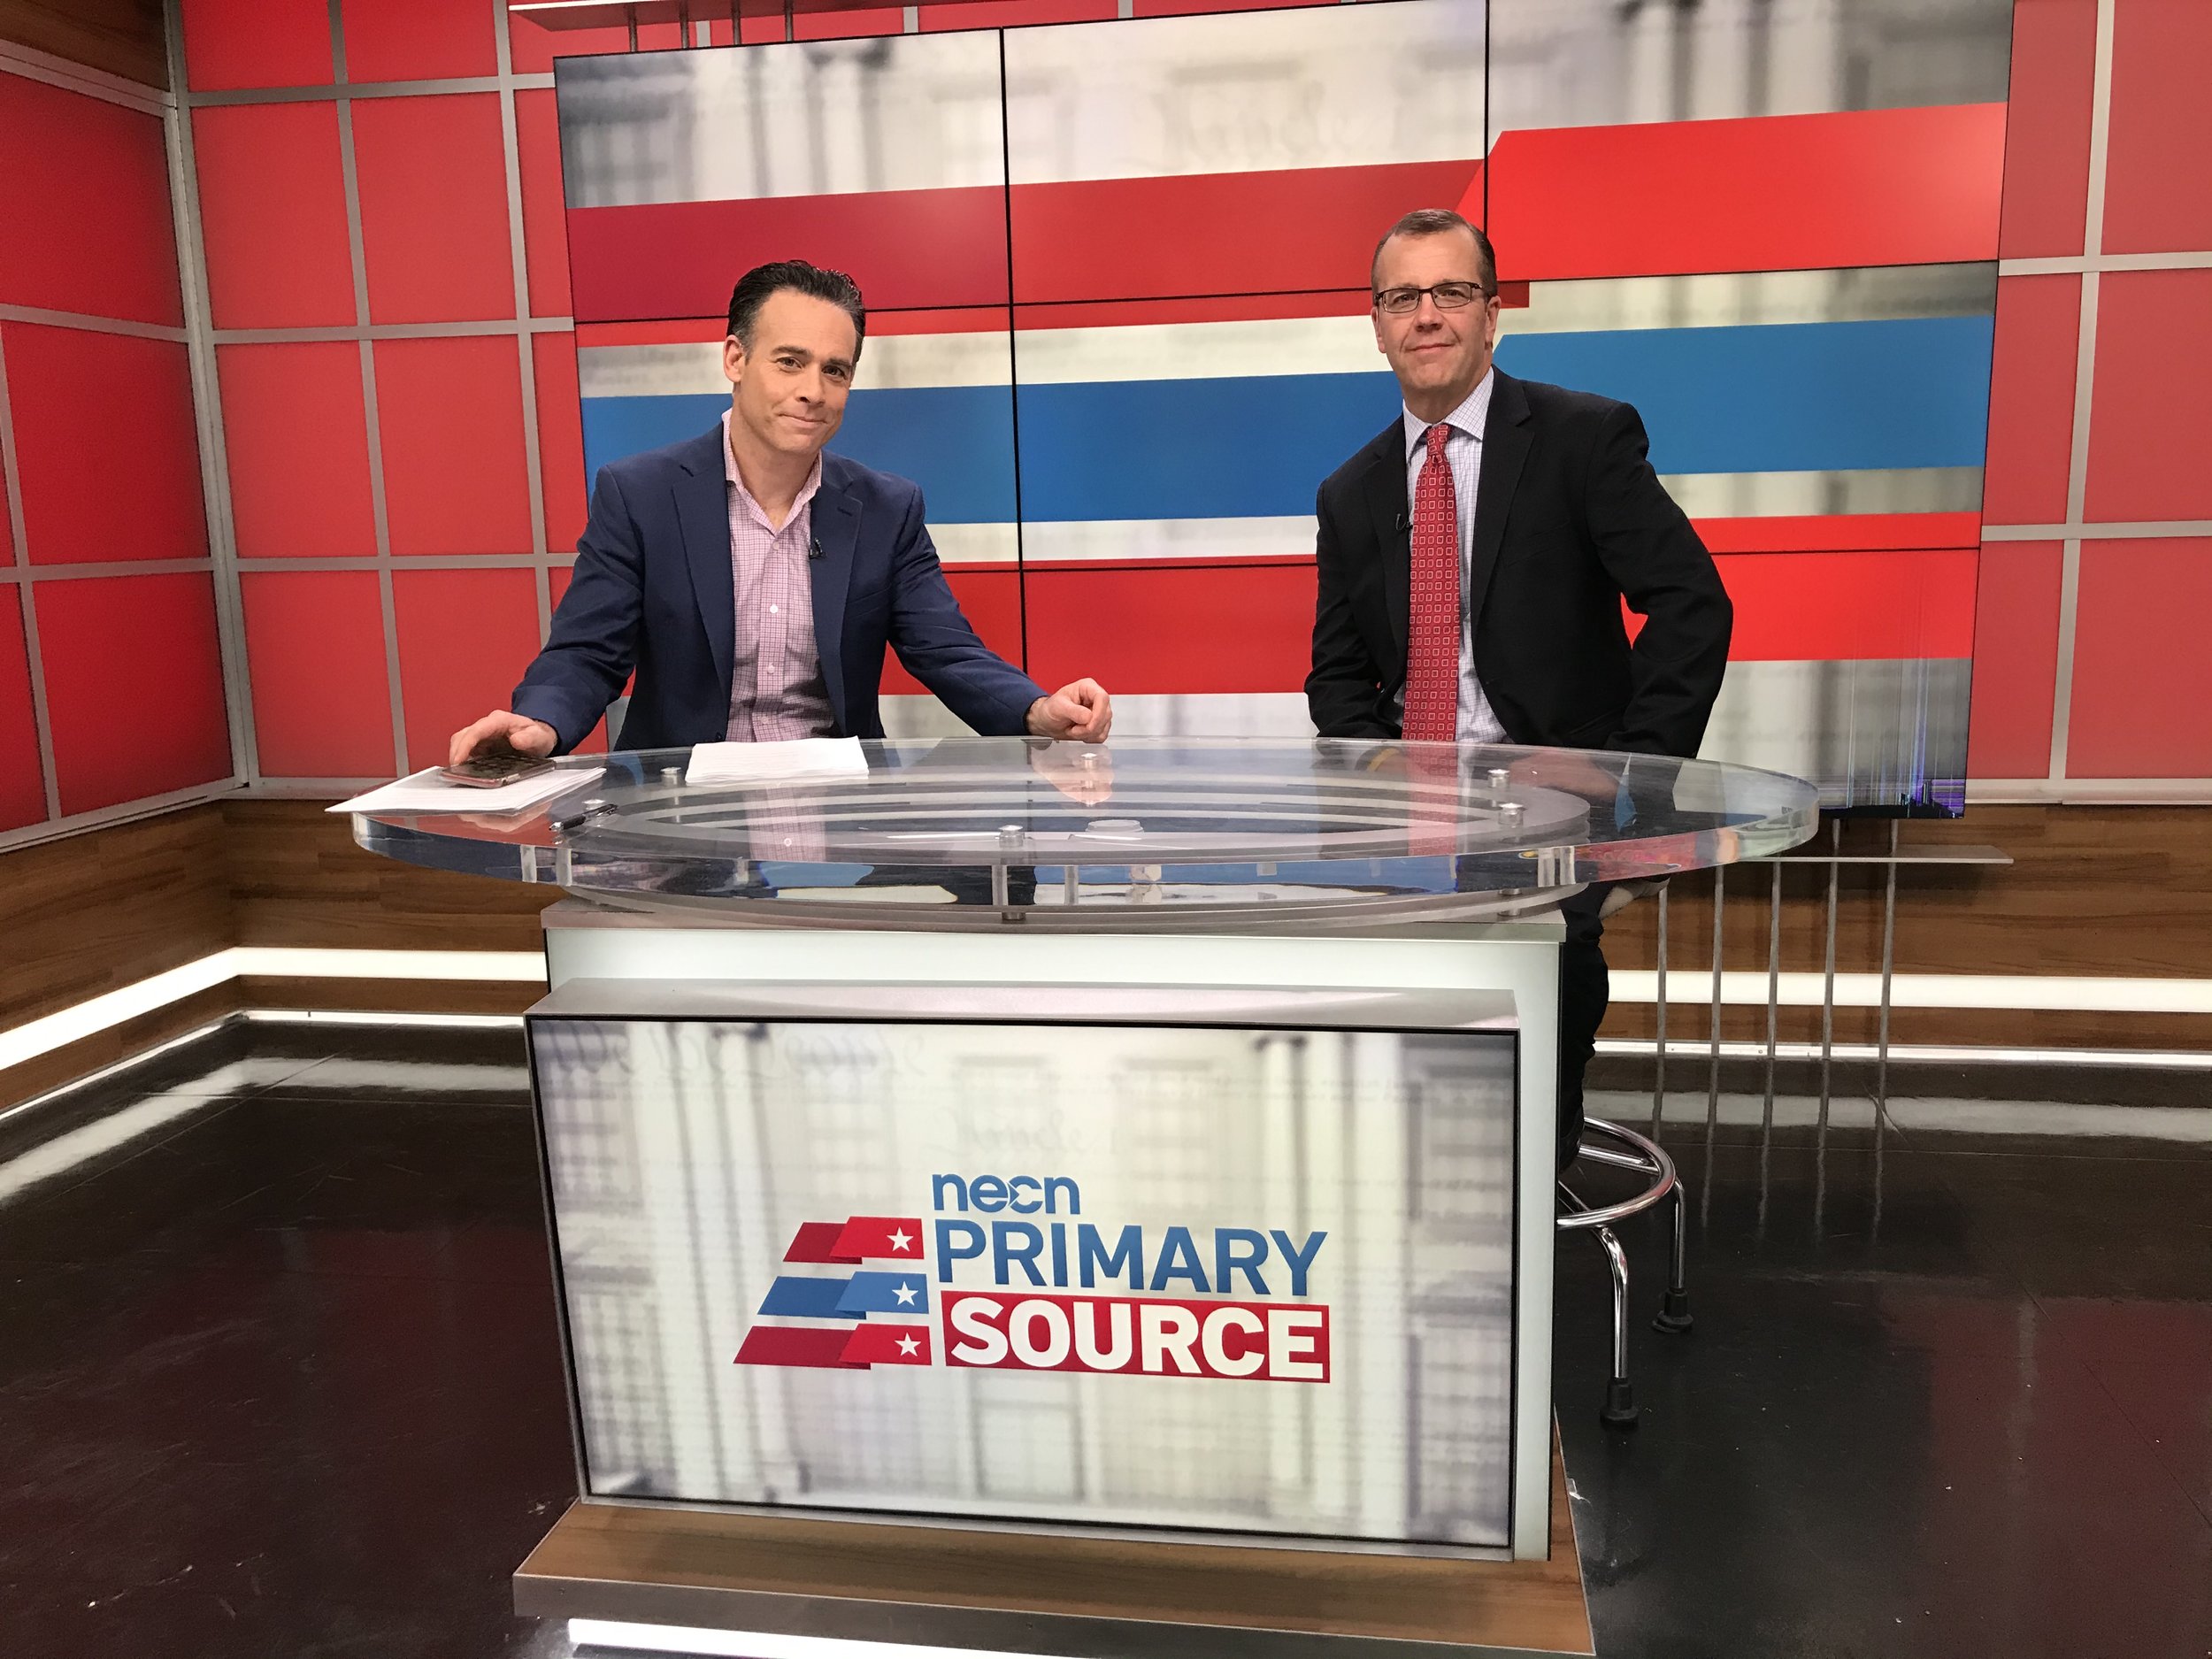  Brian Schactman had me on NECN’s “Primary Source” show to speak about diplomacy, impeachment, and the 2020 primary campaign. 